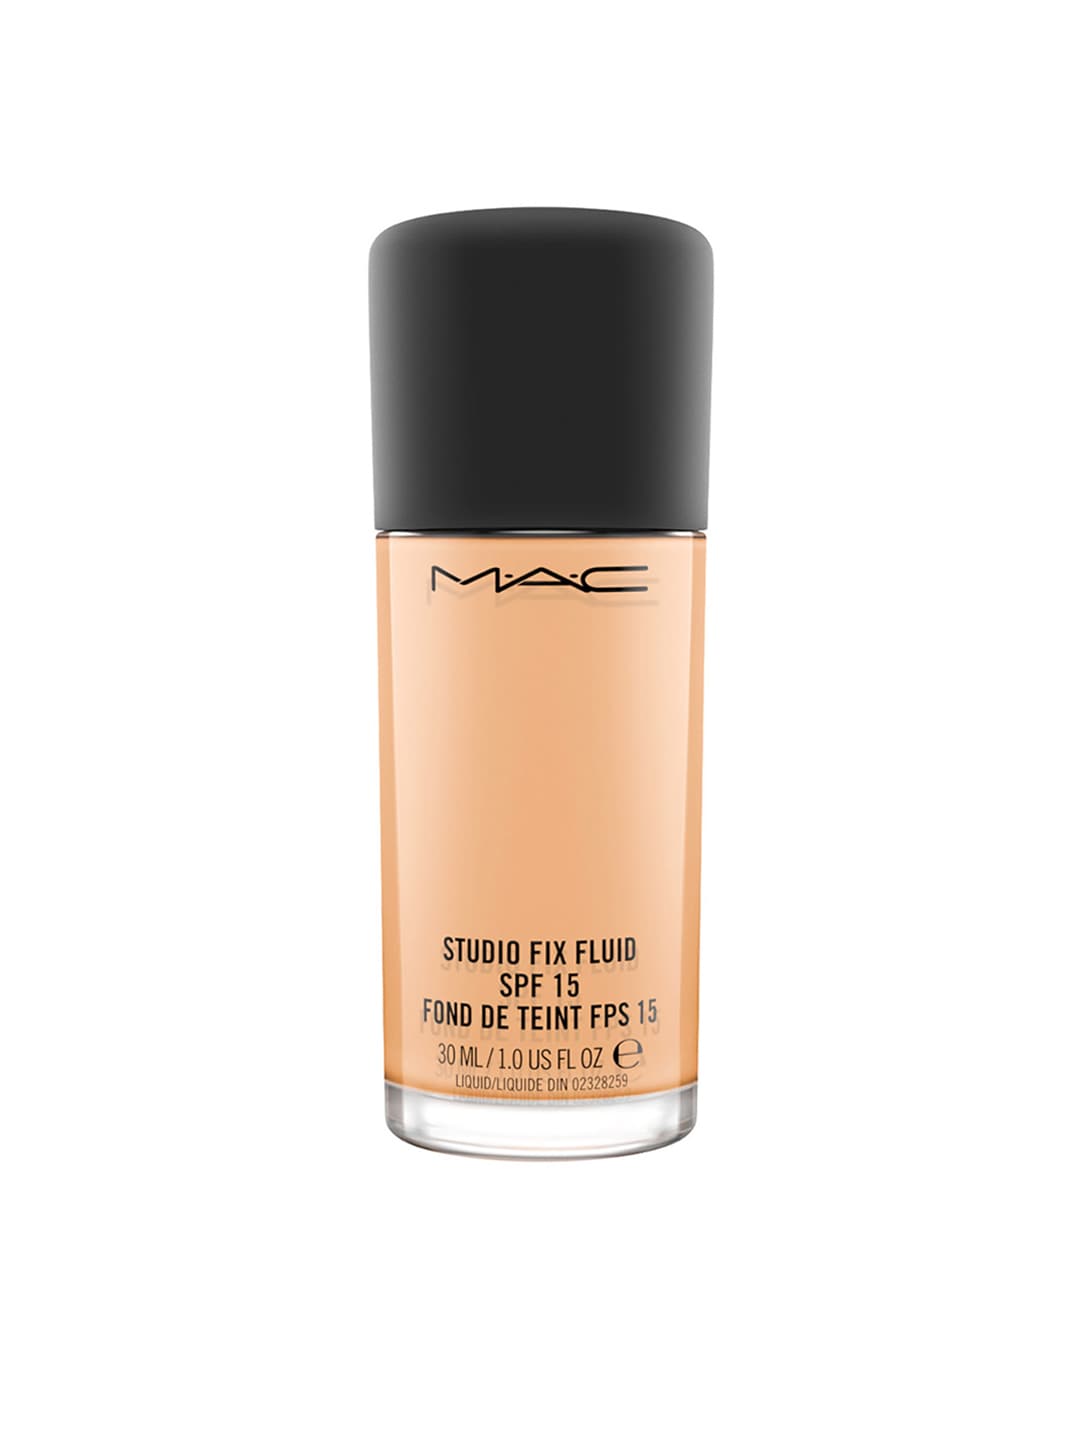 M.A.C Studio Fix Fluid Foundation with SPF 15 - NC41 30ml Price in India